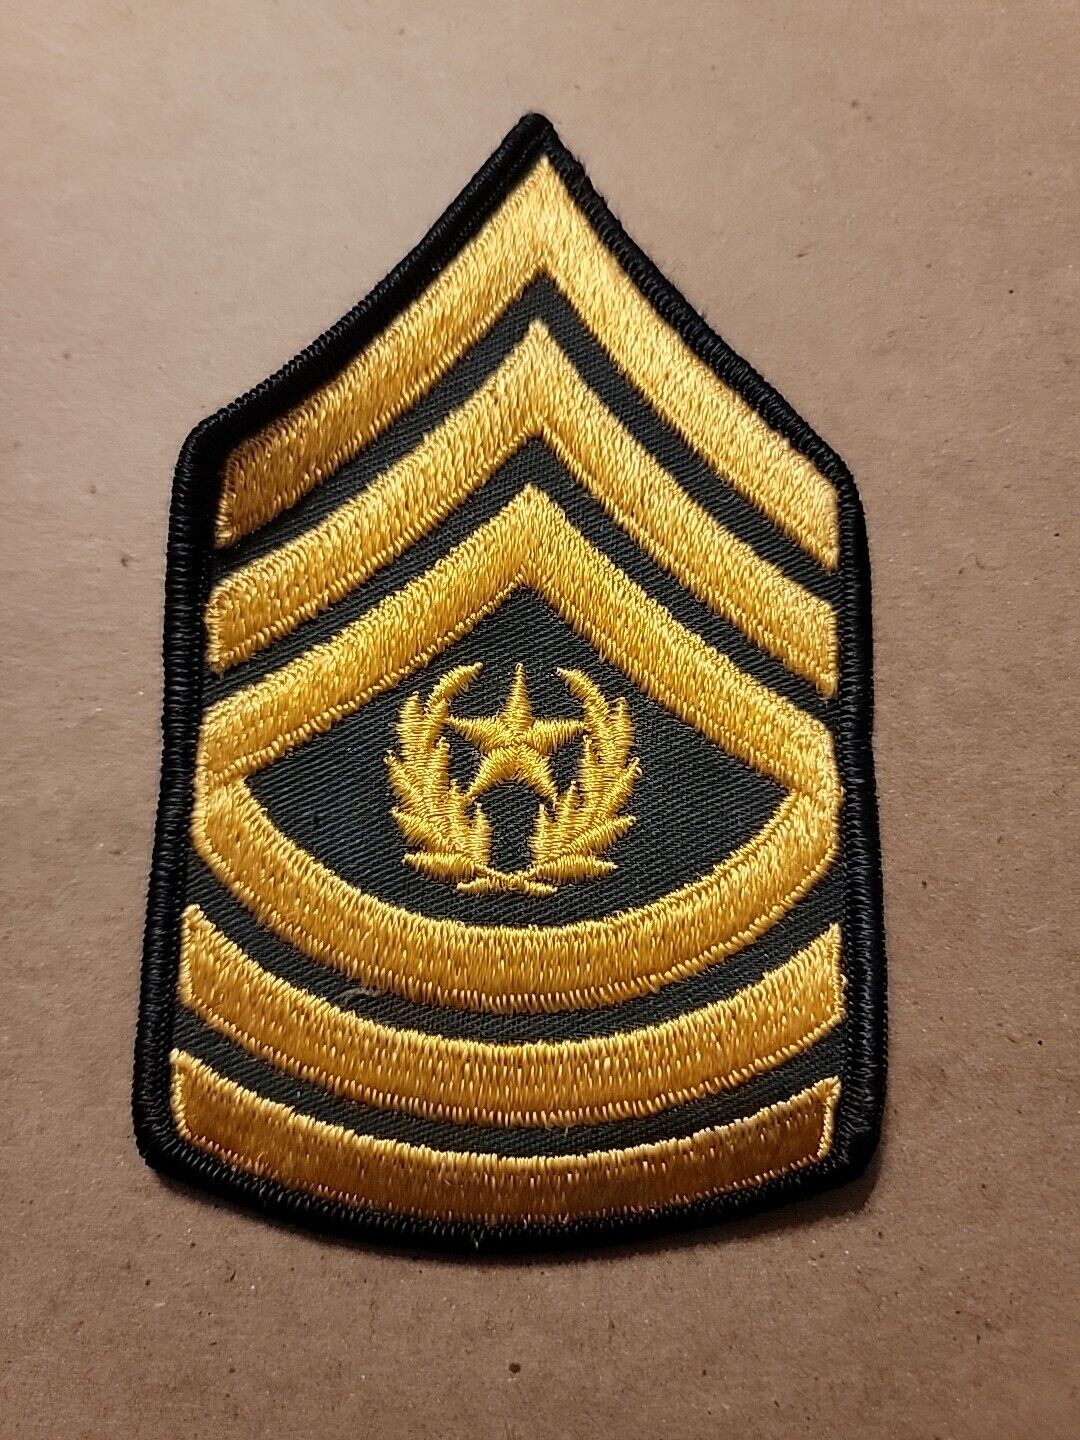 US Army Command Sergeant Major CSM Large Rank Insignia Patch Dress Greens